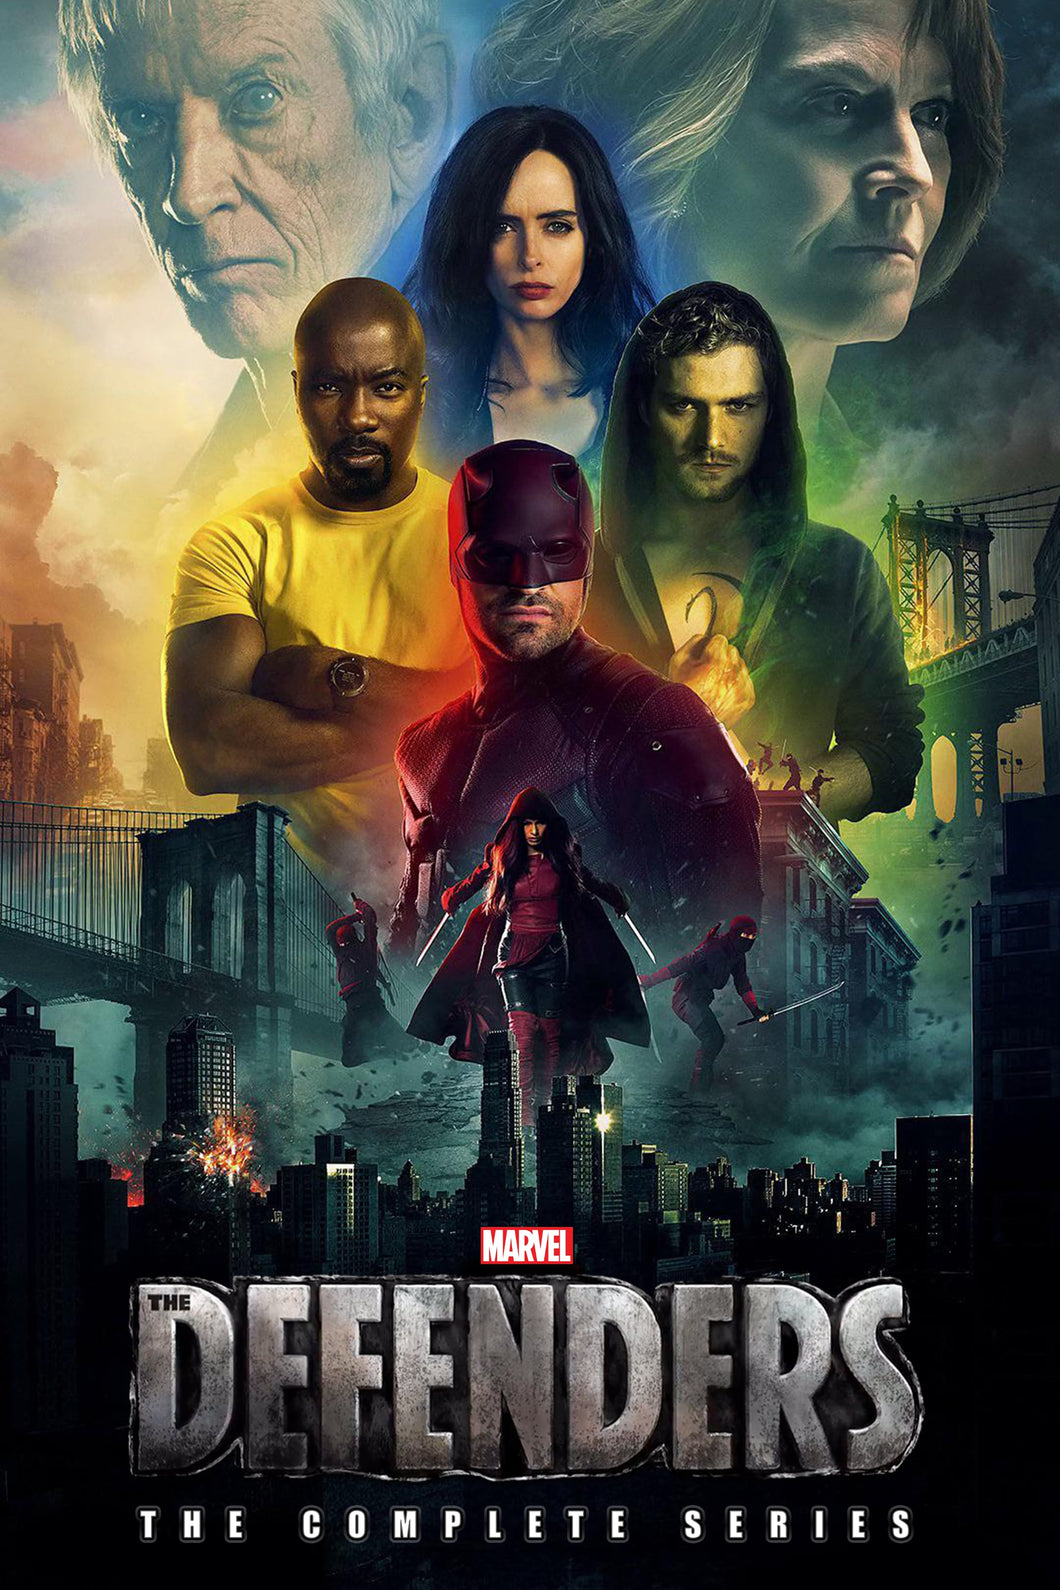 Marvel_s The Defenders (2017) TV Series High Quality Glossy Paper A1 A2 A3 A4 A3 Framed or Unframed!!!